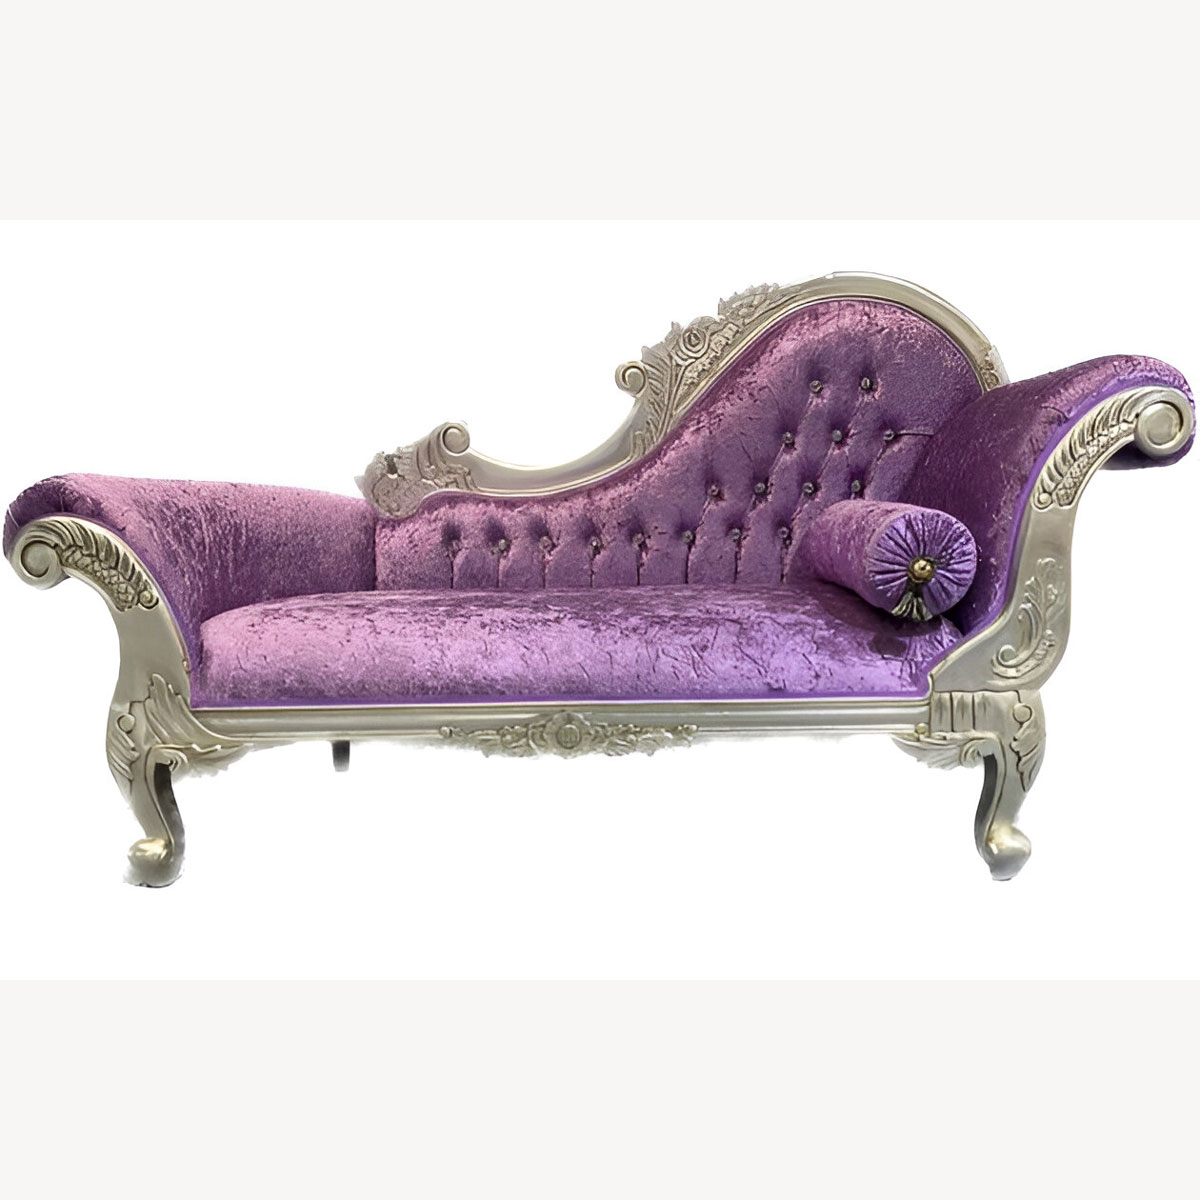 Silver Leaf Medium Hampshire Chaise In Lavender Crushed Velvet With Crystal Buttoning 5 - Hampshire Barn Interiors - Silver Leaf Medium Hampshire Chaise In Lavender Crushed Velvet With Crystal Buttoning -